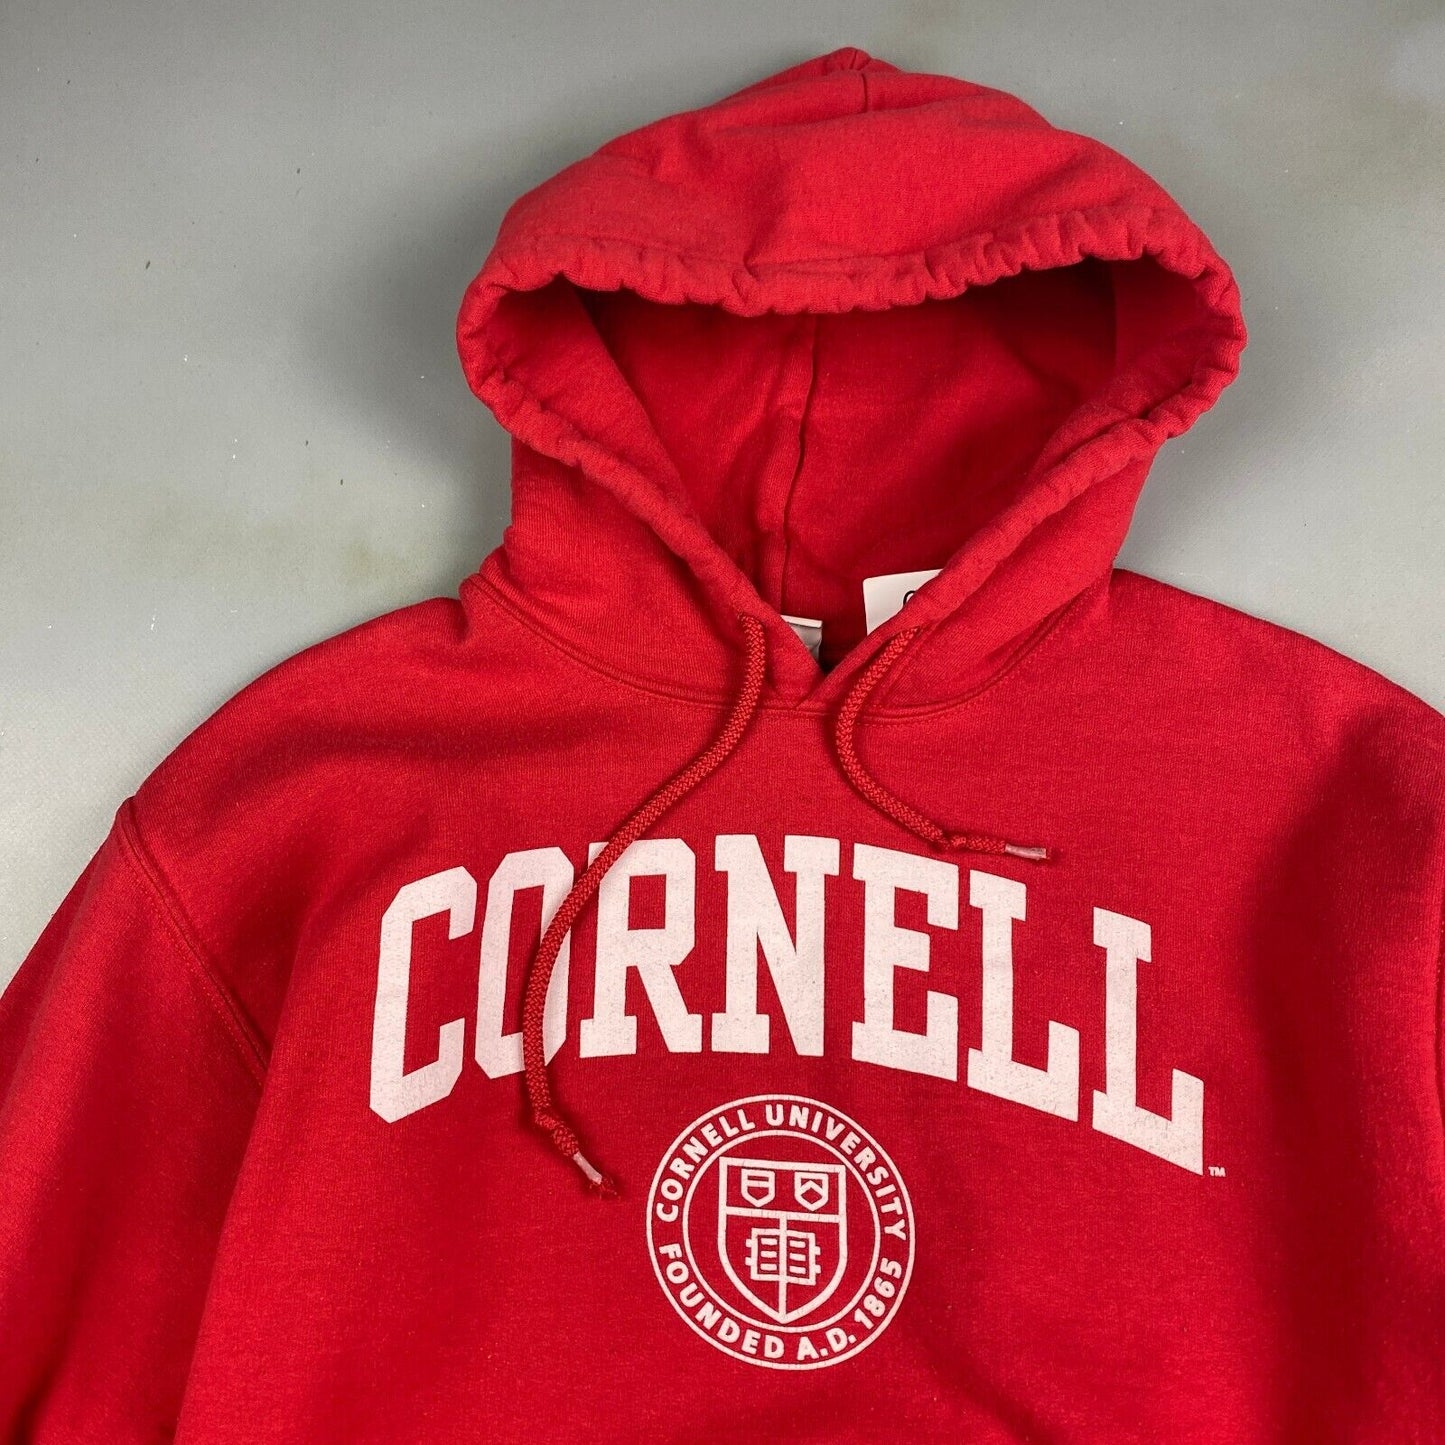 VINTAGE Cornell University Crest Red Hoodie Sweater sz Small Mens